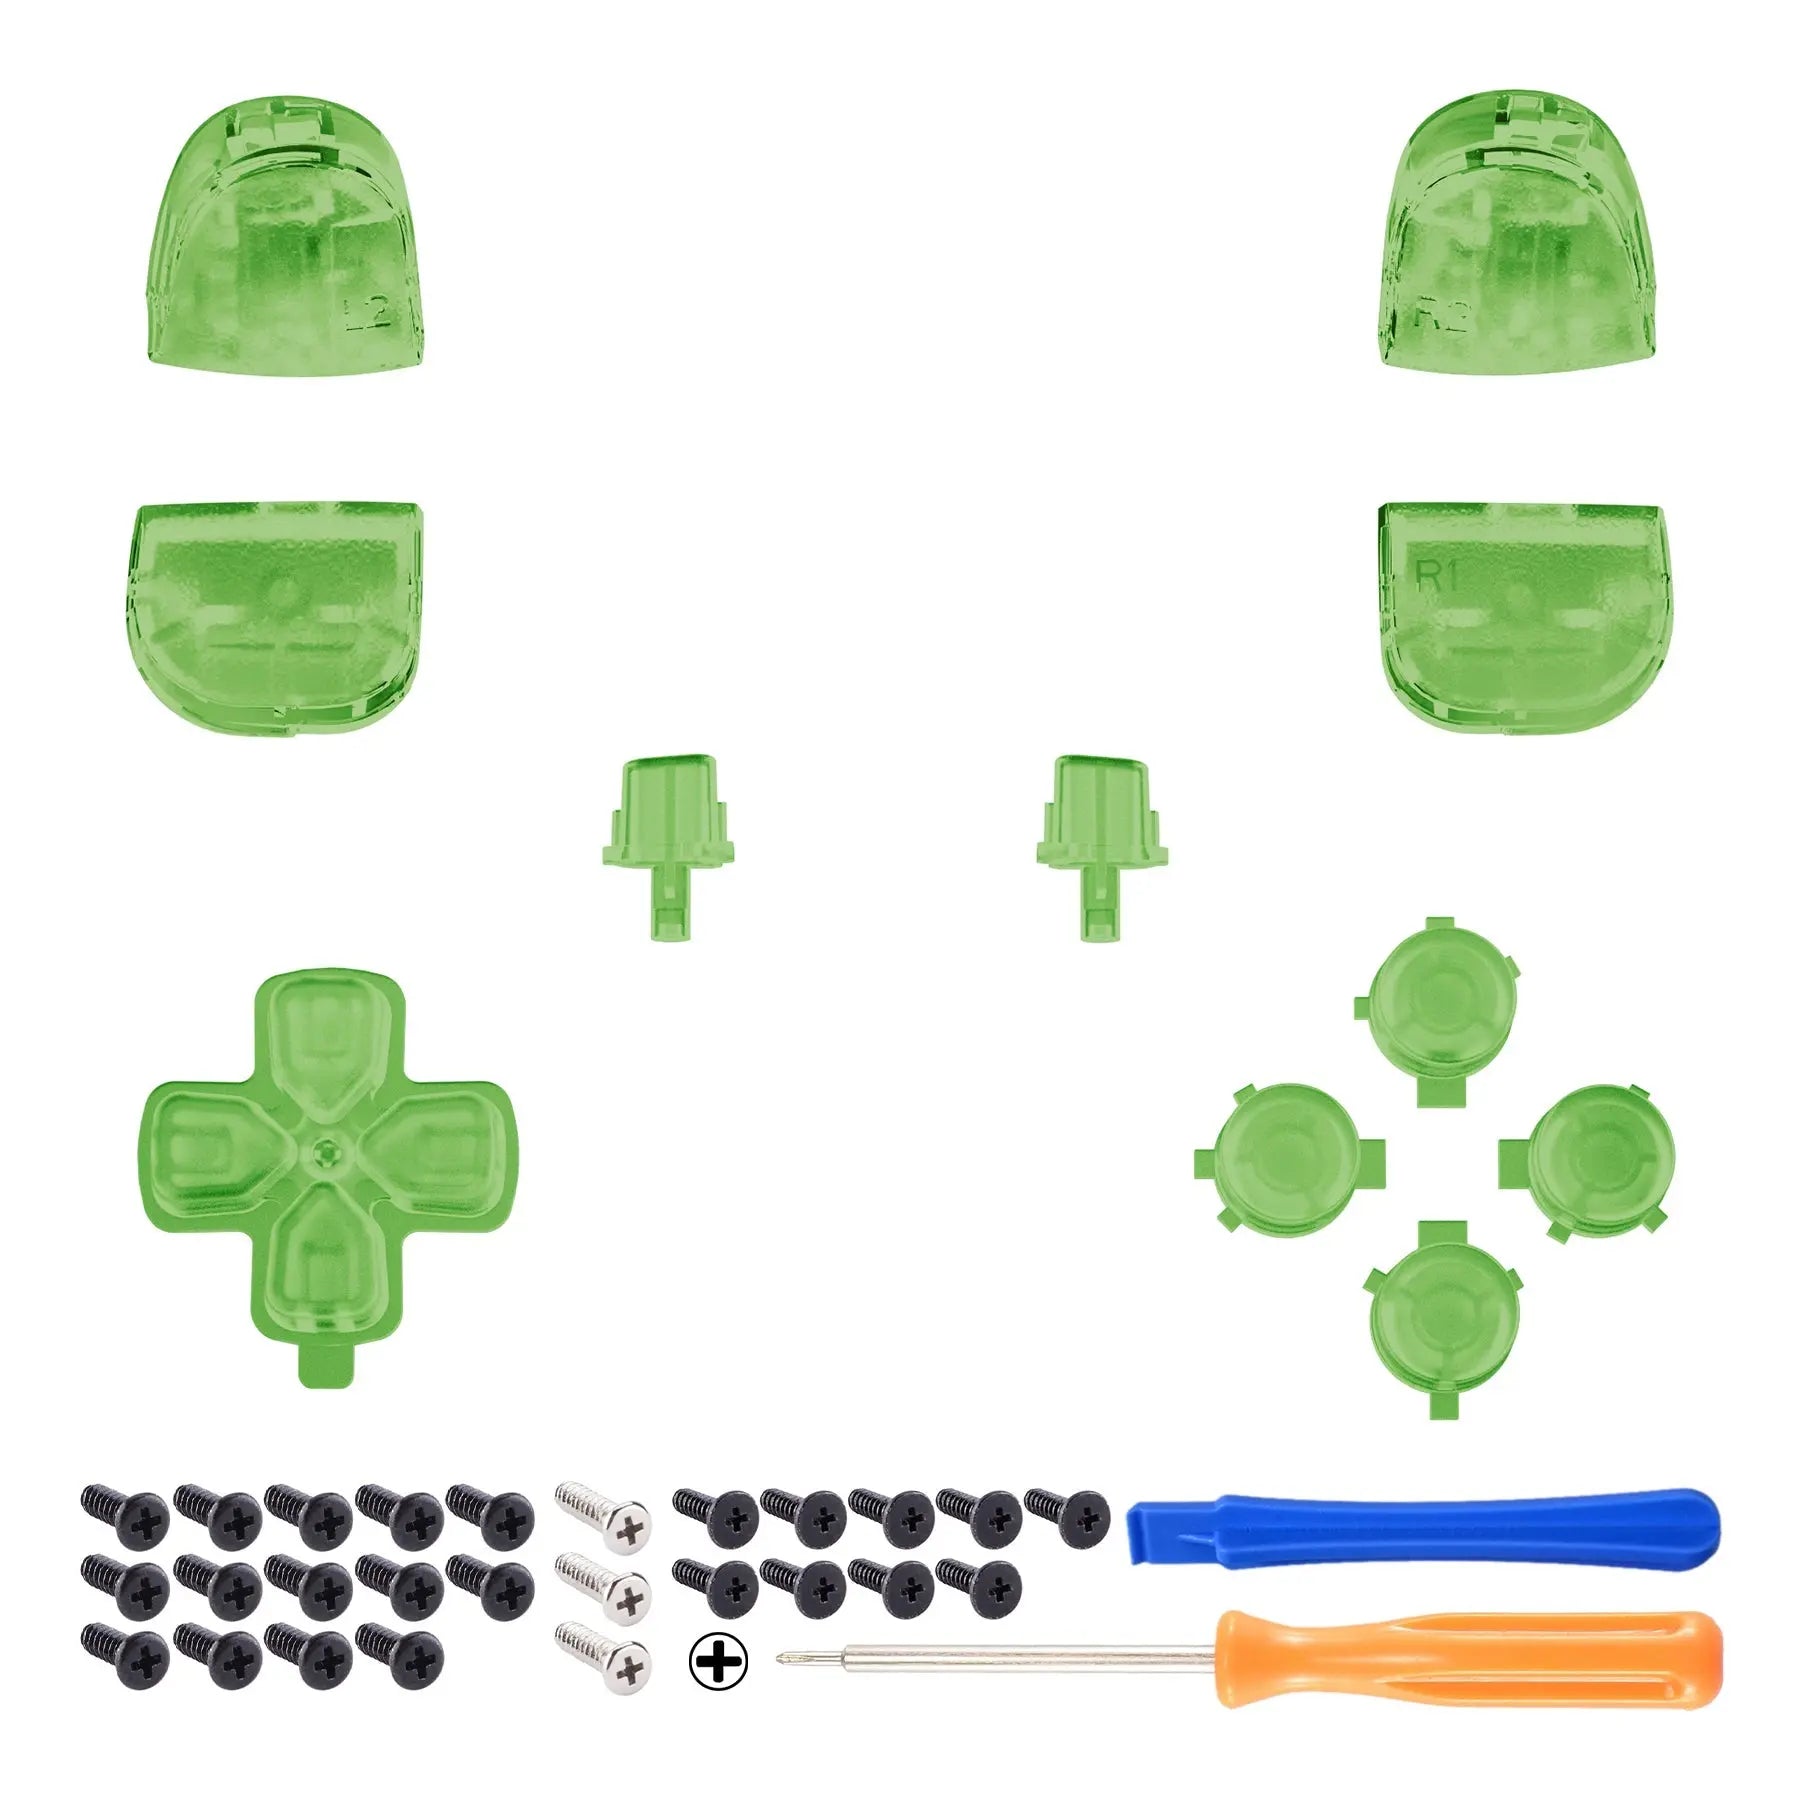 Replacement D-pad R1 L1 R2 L2 Triggers Share Options Face Buttons, Clear Green Full Set Buttons Compatible With ps5 Controller BDM-010 & BDM-020 - JPF3003G2 eXtremeRate